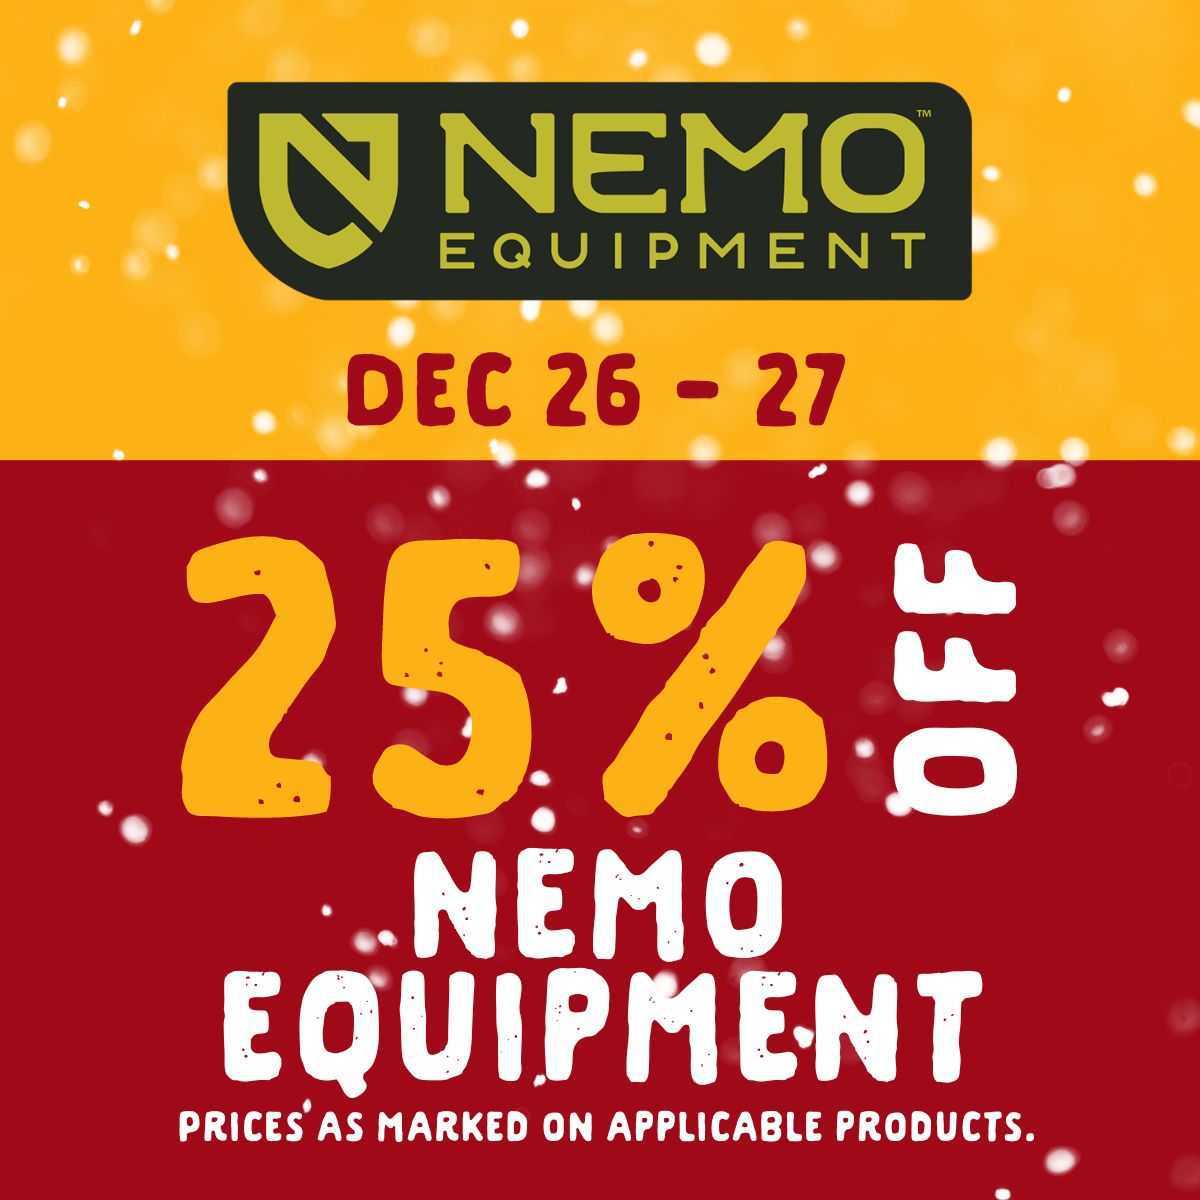 25% off Nemo Equipment from December 26 to 27. Prices as marked on applicable products.